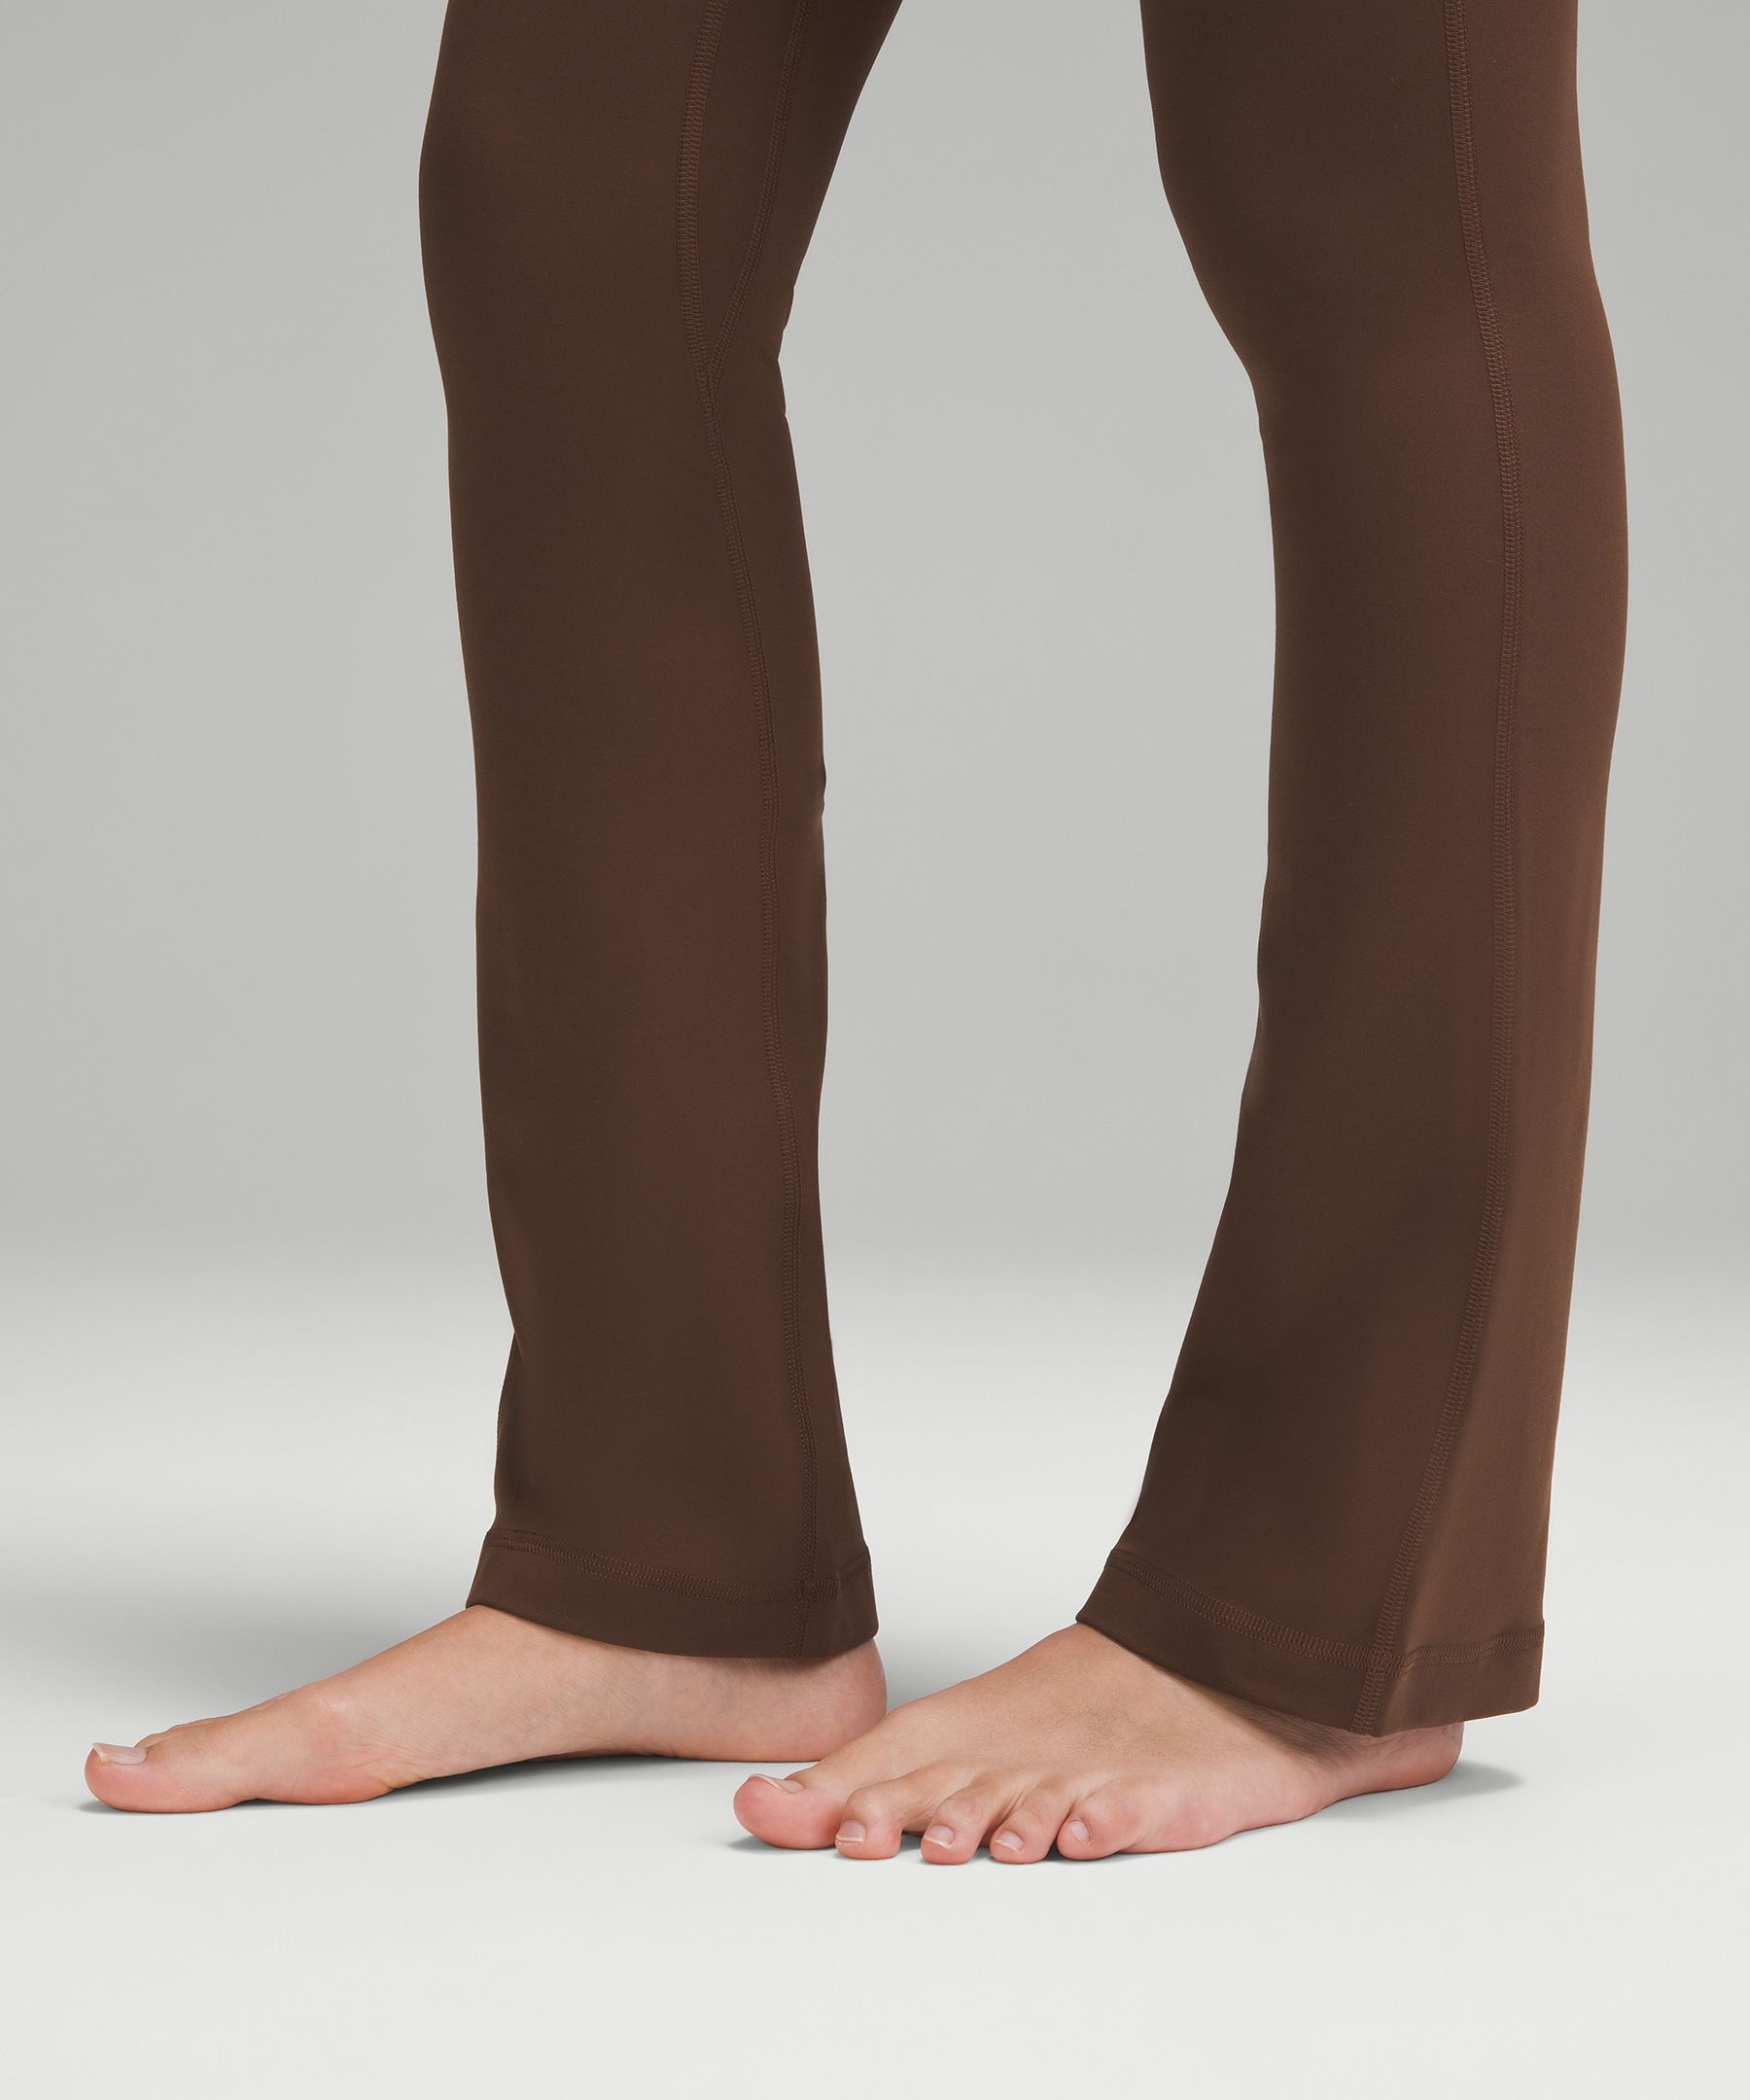 What do we think of these lululemon Align Mini-Flare pants in Java? I